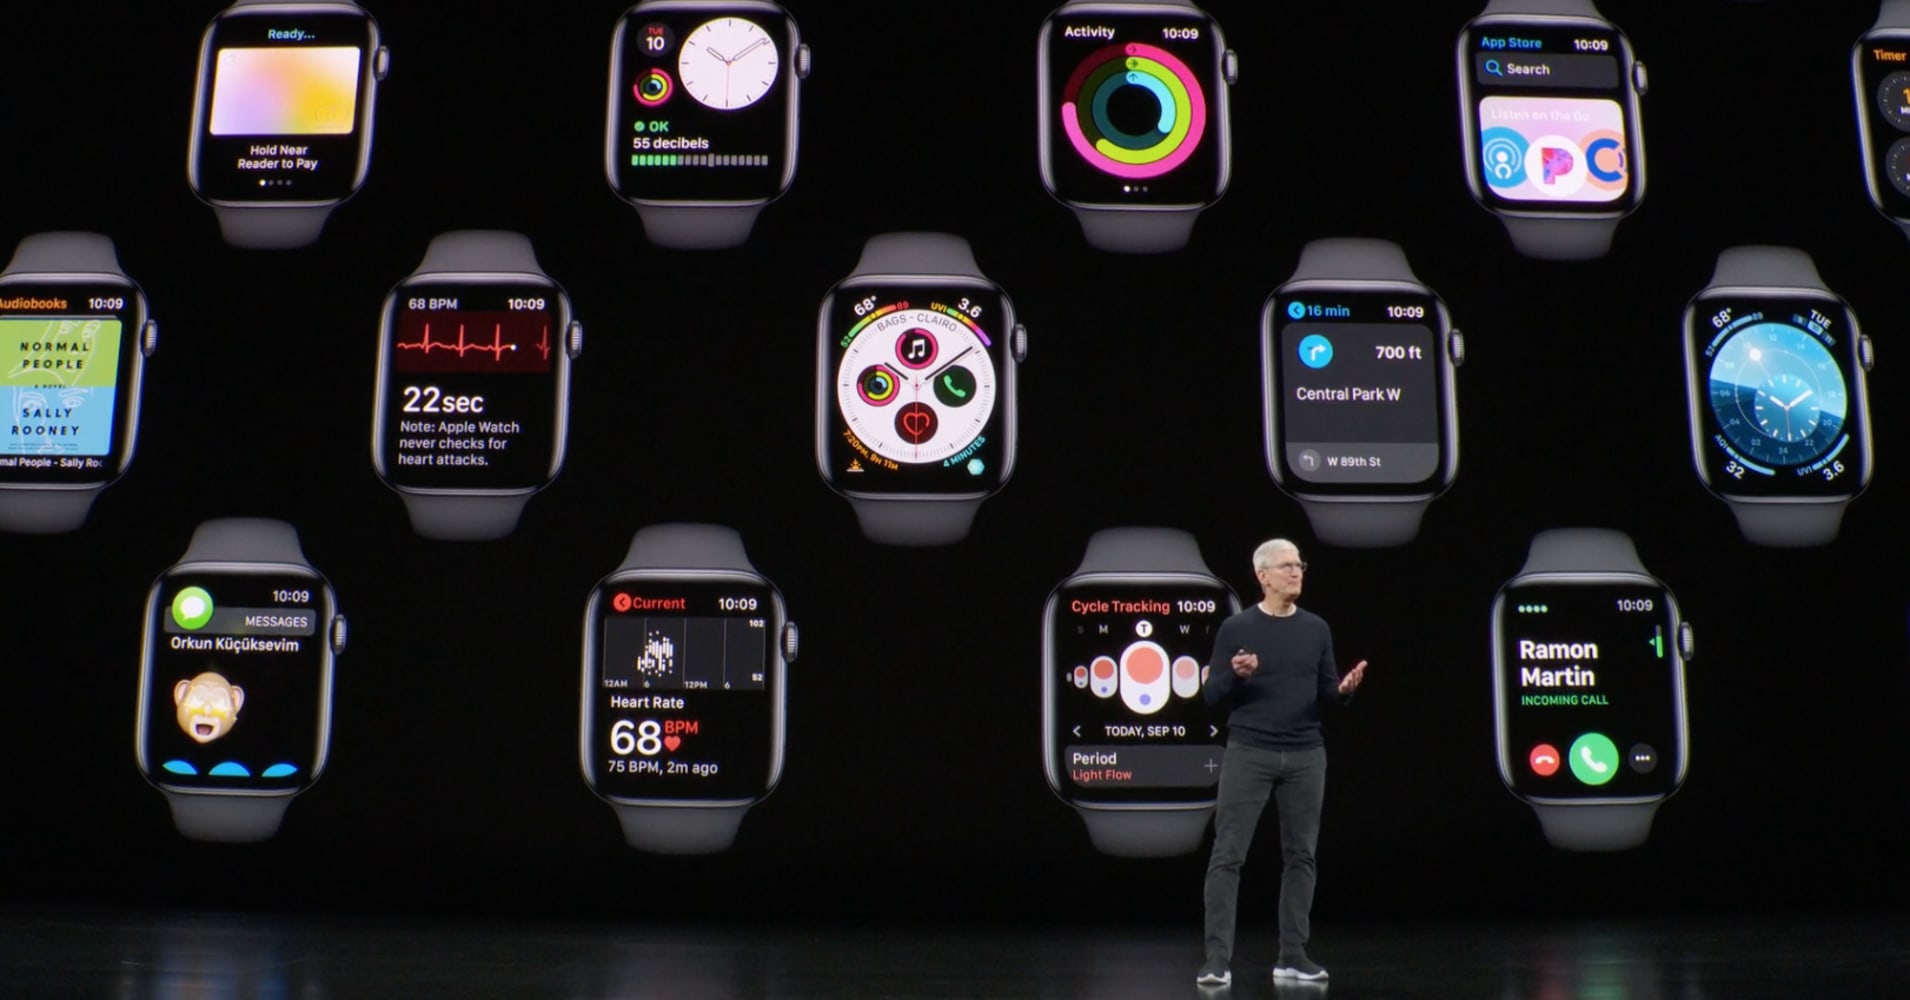 Earlier this year Apple launched several health studies using Apple Watch. A sleep tracker is reportedly in the works, but was not part of Tuesday's big product event.